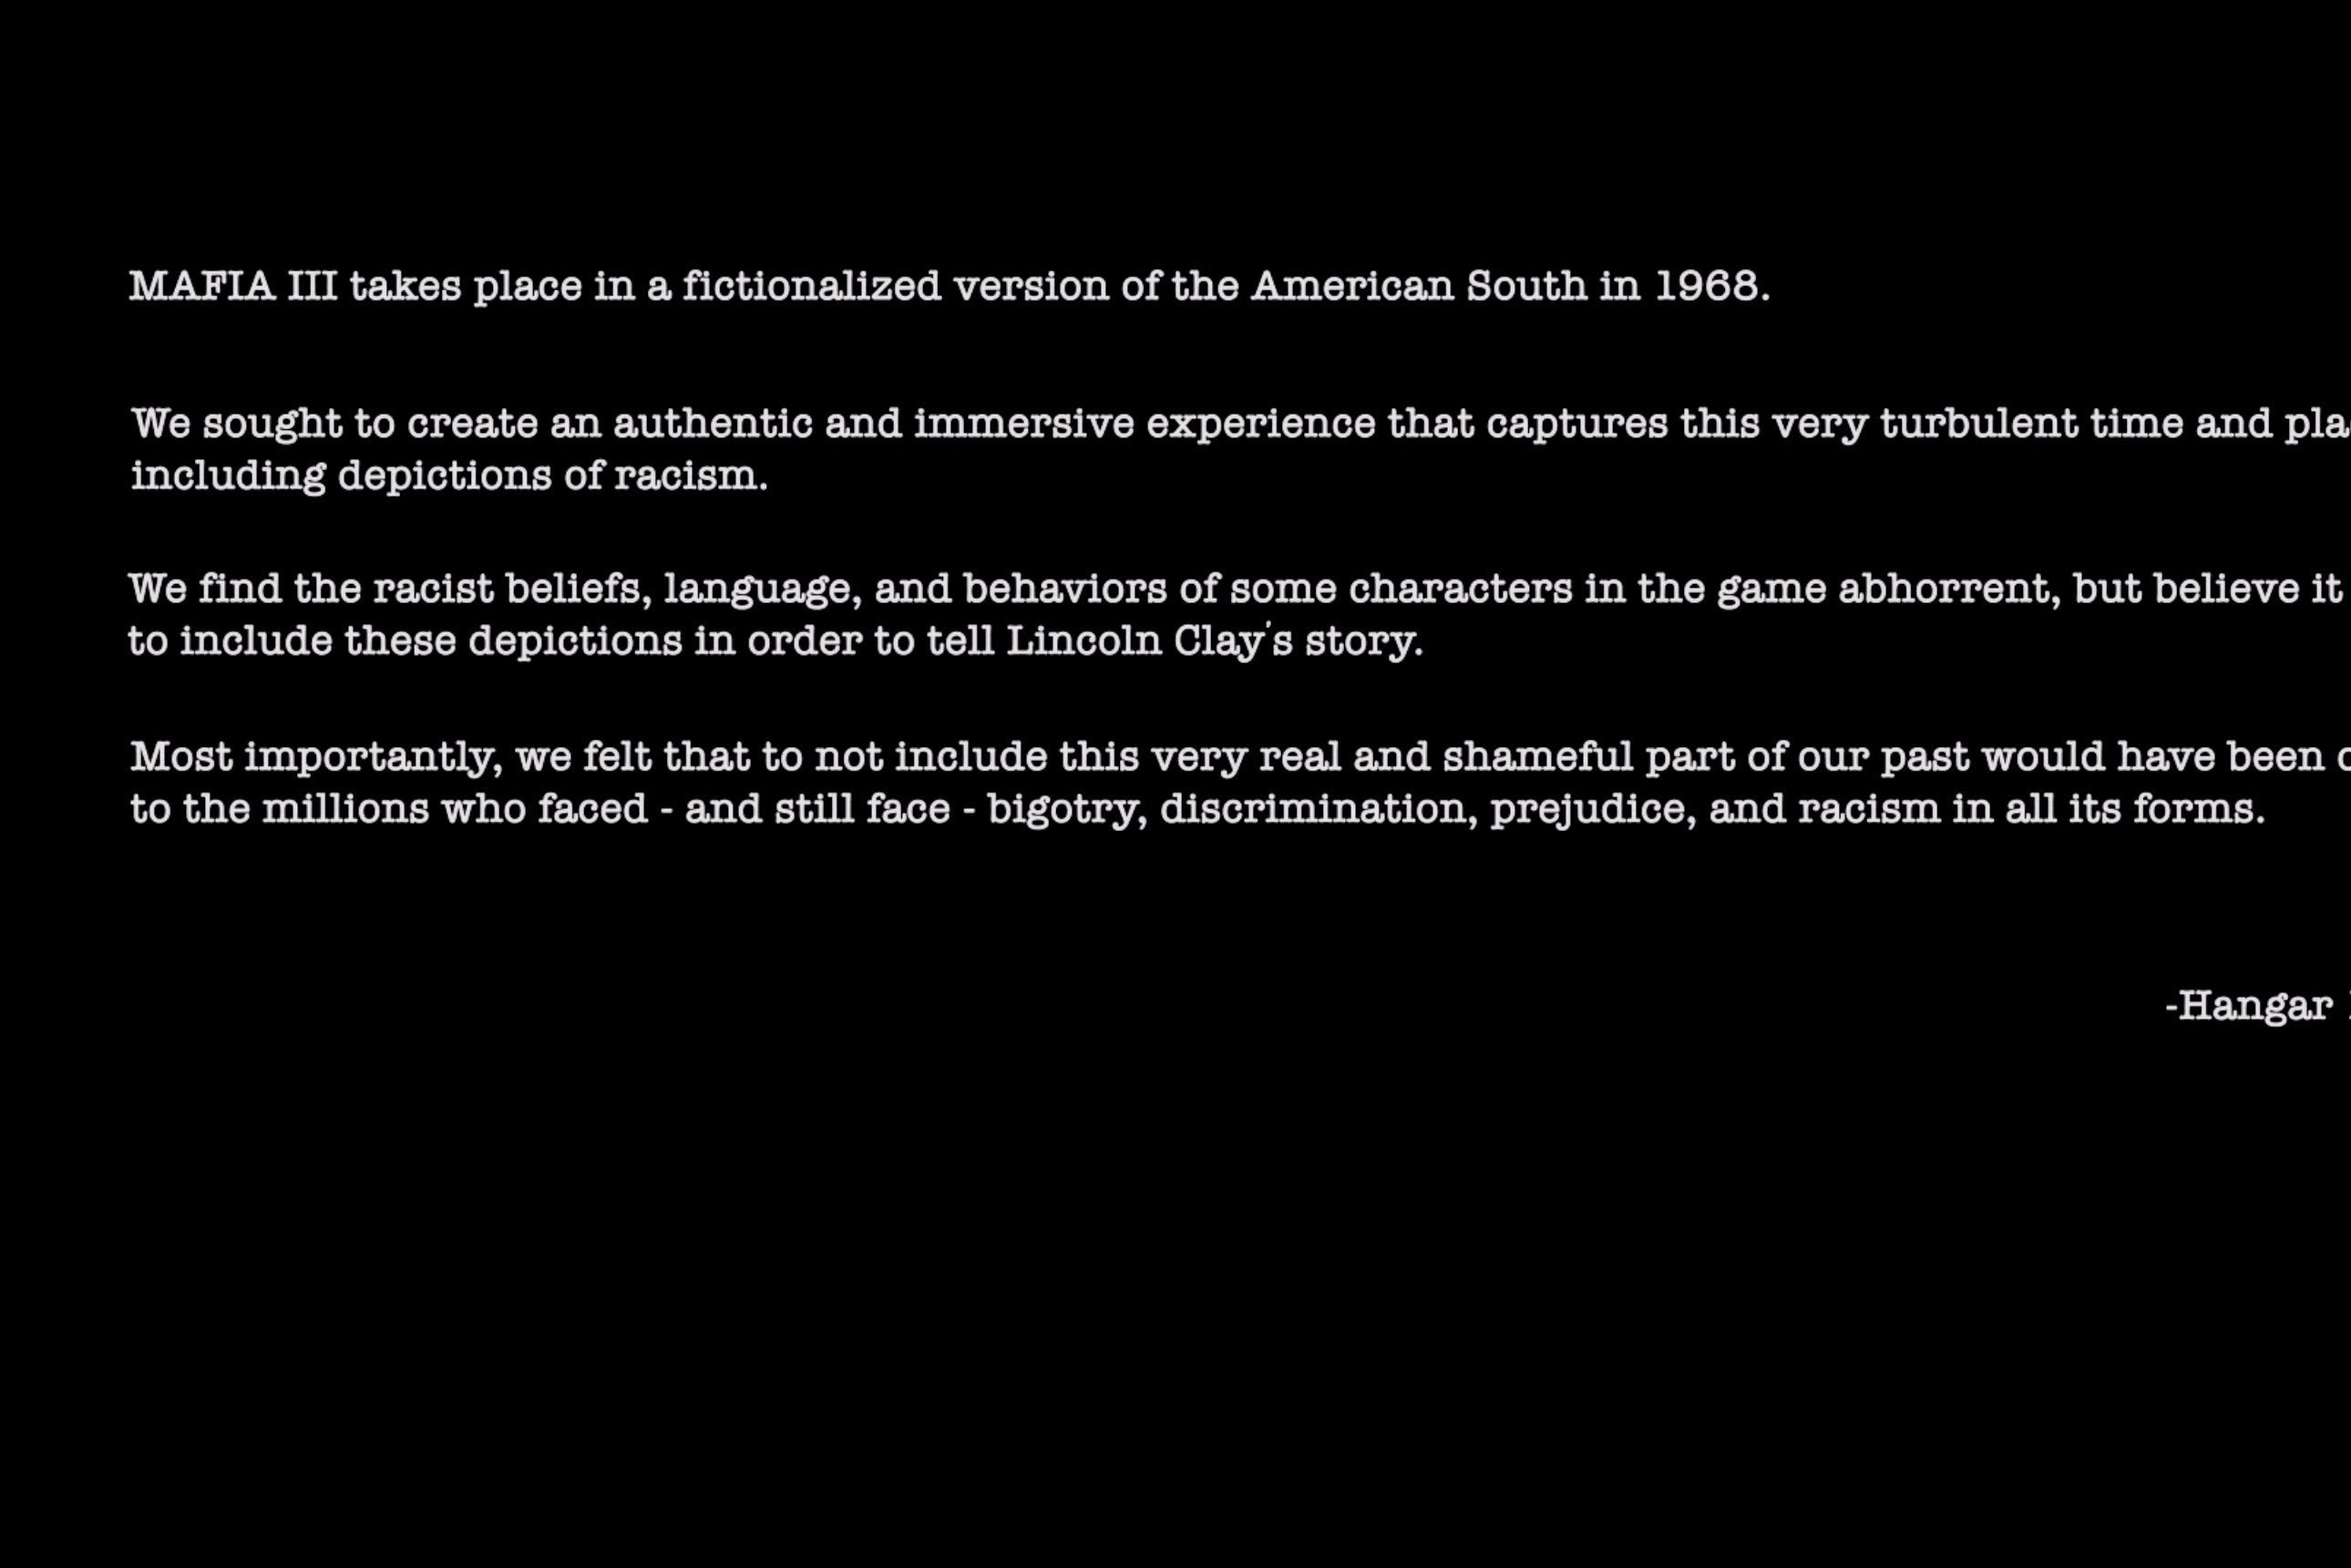 Image for Mafia 3's in-game statement on its depiction of racism